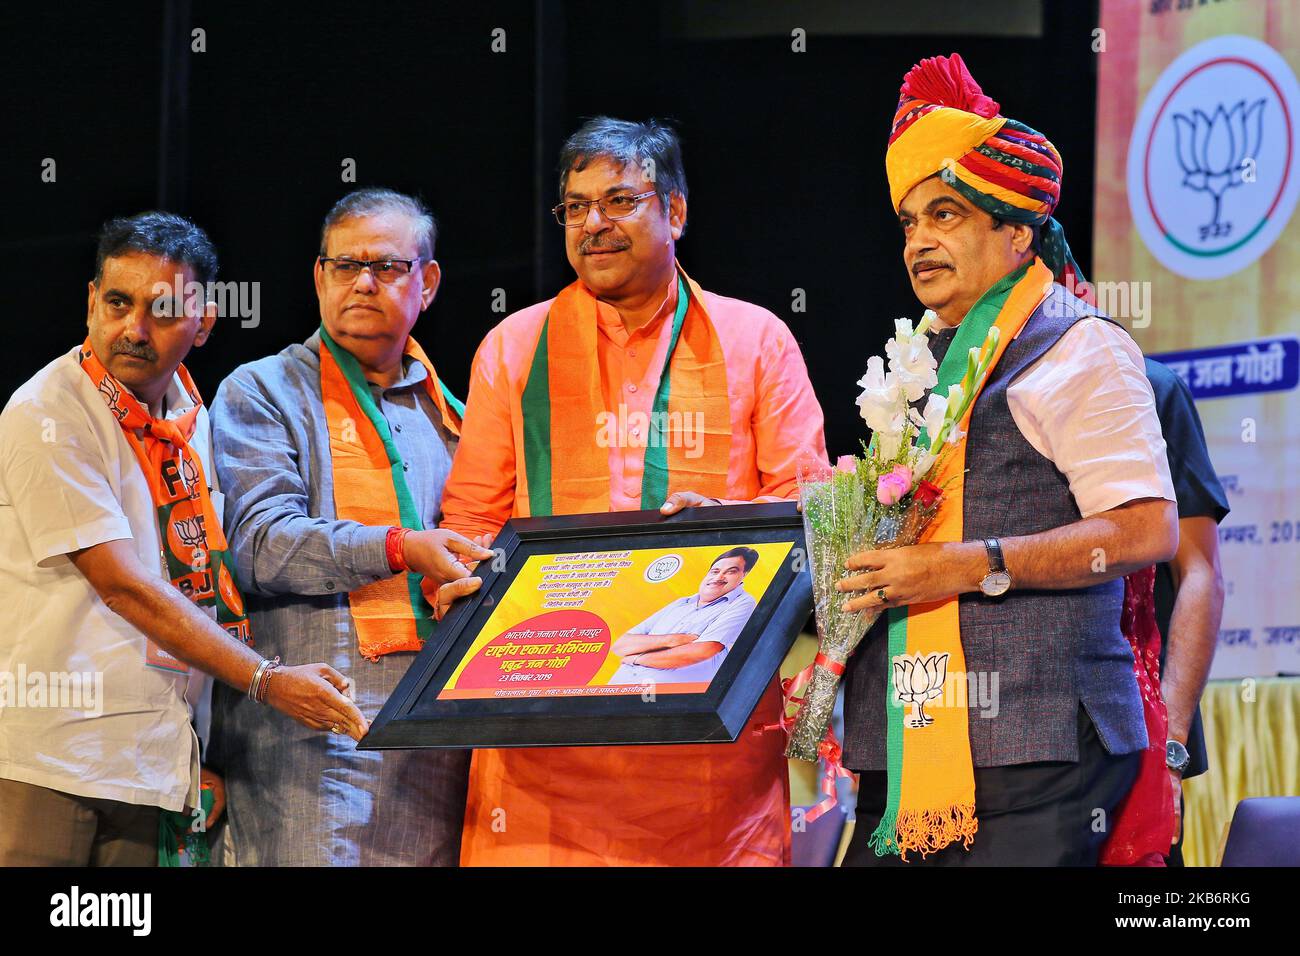 Union Minister of Transport Nitin Gadkari being welcomed by Rajasthan BJP leaders during the ' One Nation One Consitution' program at Birla Auditorium in Jaipur ,Rajasthan, India, Sept 23,2019.(Photo By Vishal Bhatnagar/NurPhoto) (Photo by Vishal Bhatnagar/NurPhoto) Stock Photo